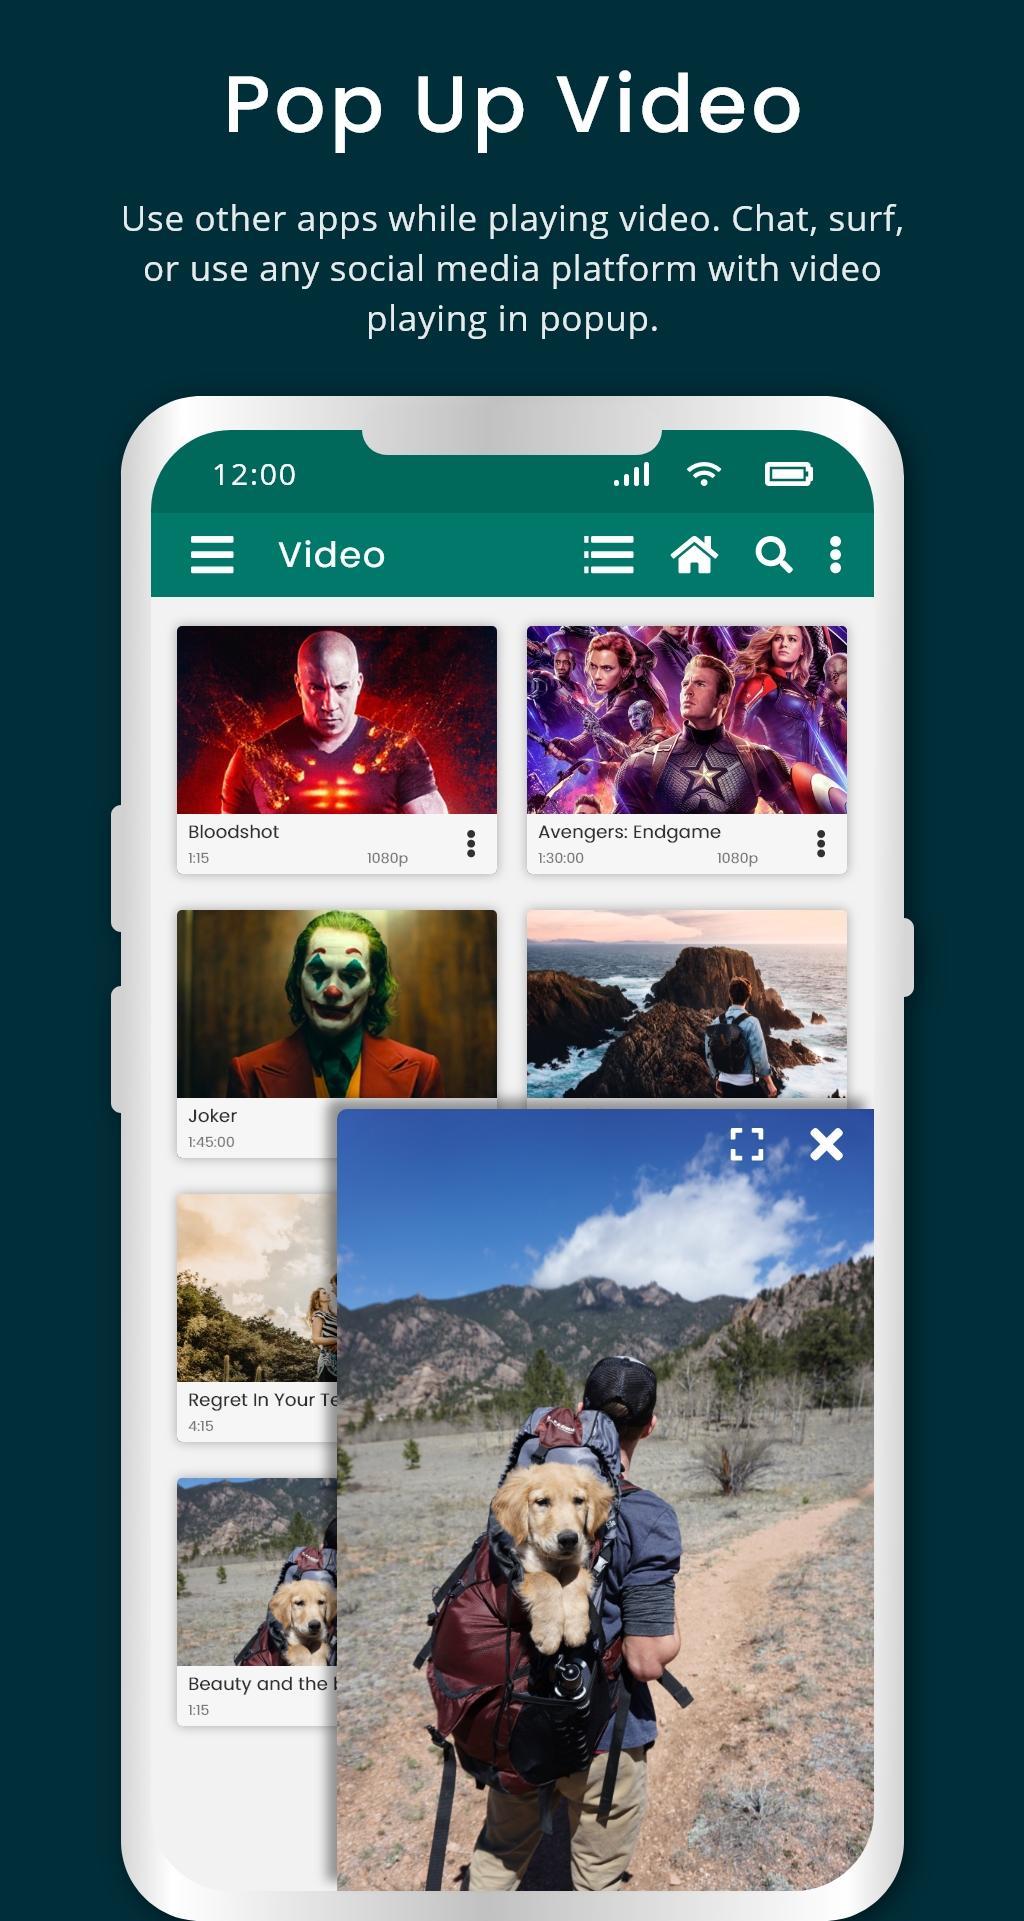 Mp4 Media Player - Mp3 Player, Video Player for Android - APK Download